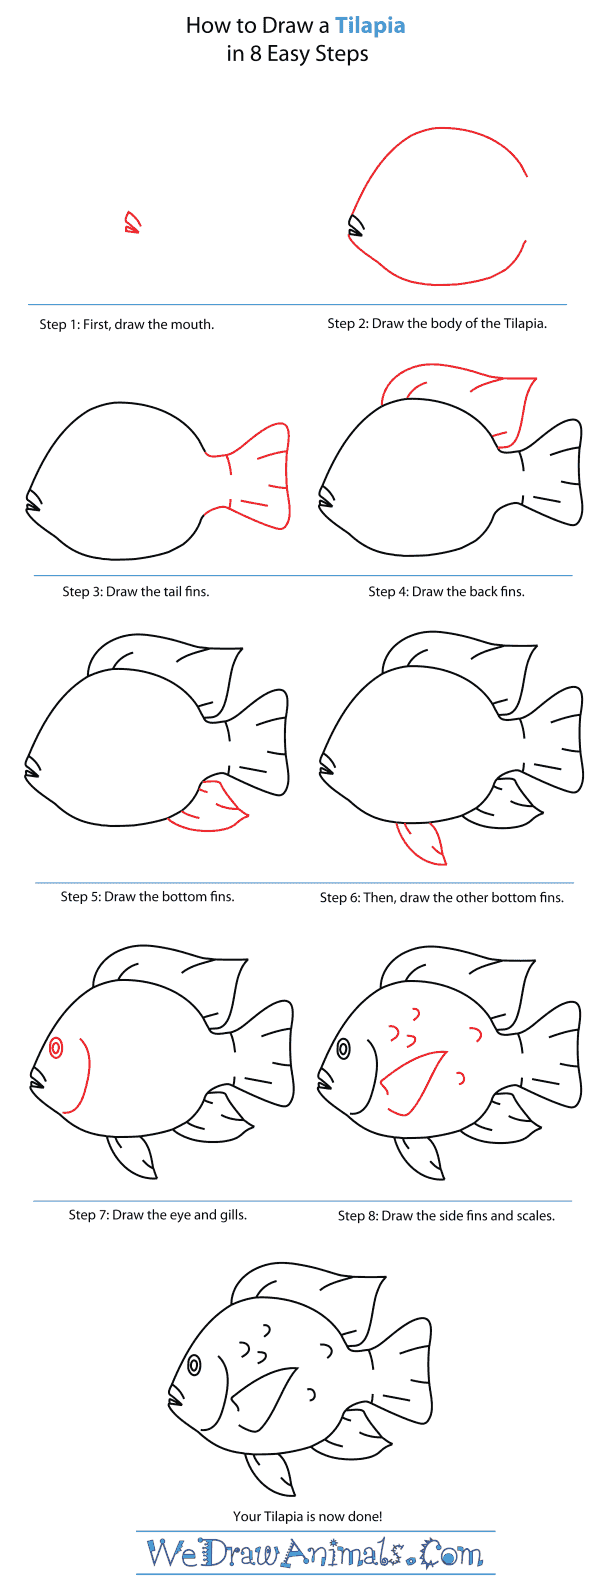 How to Draw a Tilapia - Step-By-Step Tutorial